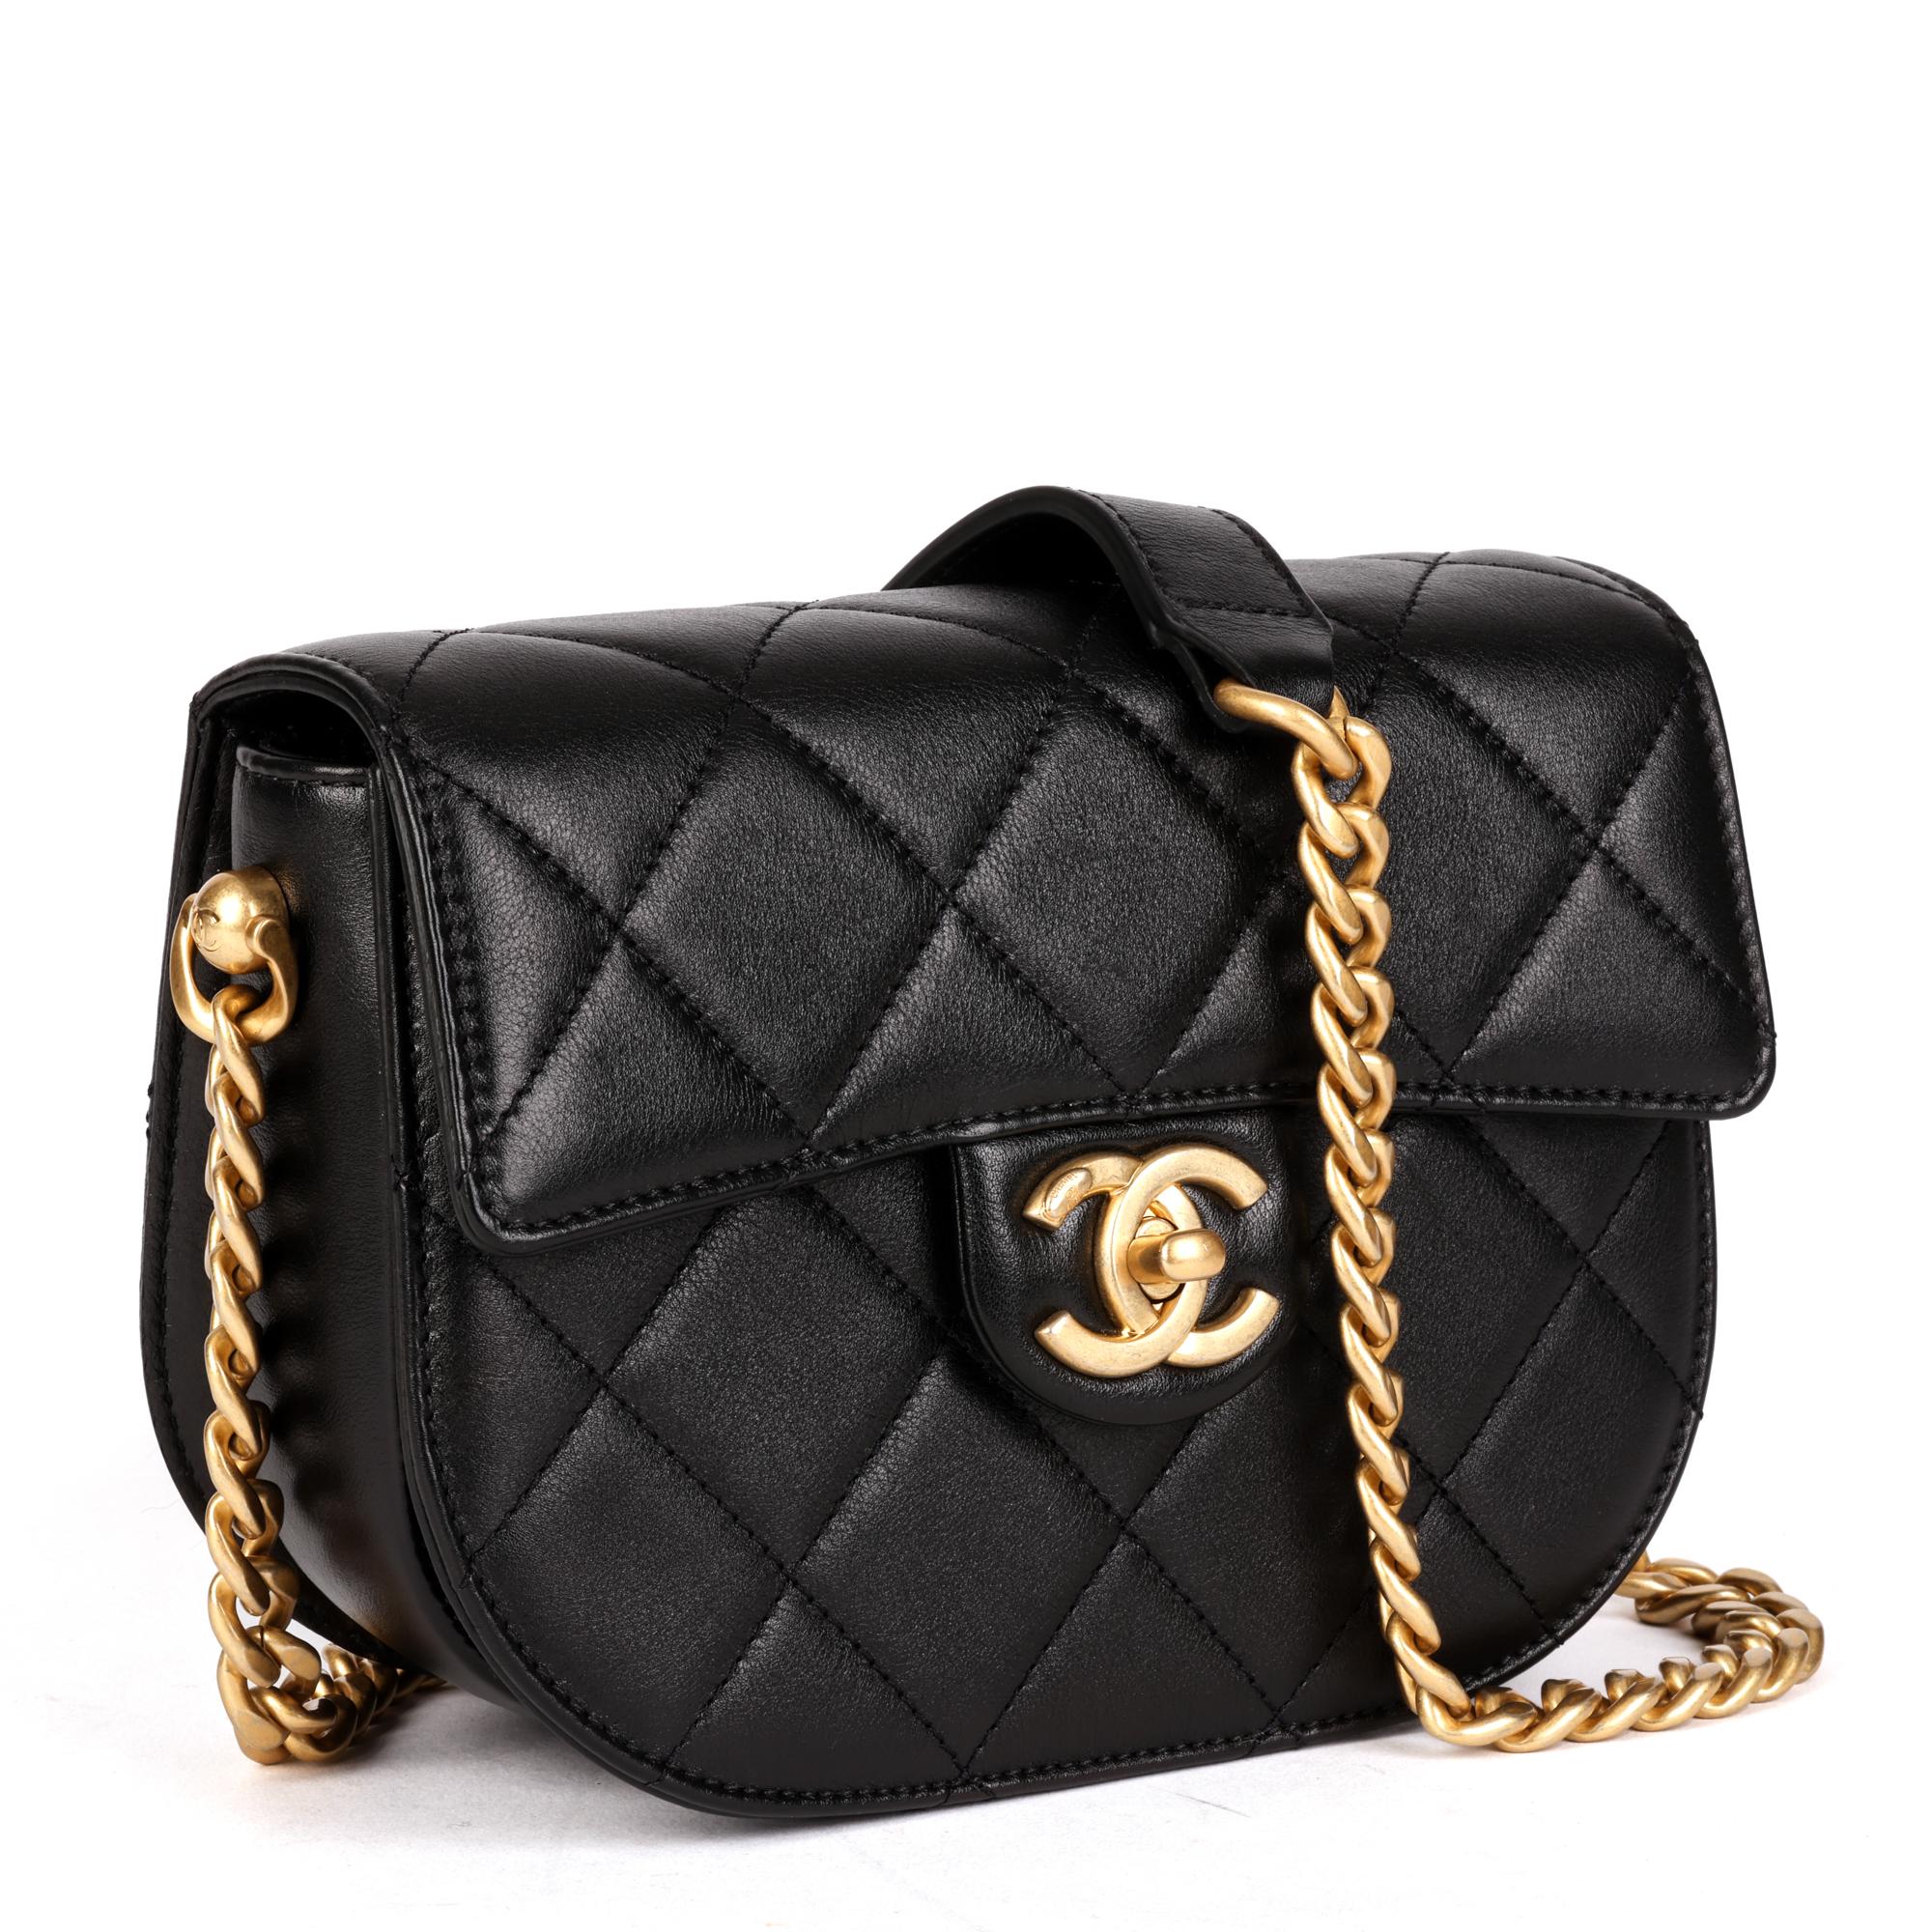 CHANEL
Black Quilted Lambskin Mini Messenger

Serial Number: 31185776
Age (Circa): 2020
Accompanied By: Chanel Dust Bag, Authenticity Card
Authenticity Details: Authenticity Card, Serial Sticker (Made in Italy) 
Gender: Ladies
Type: Shoulder,